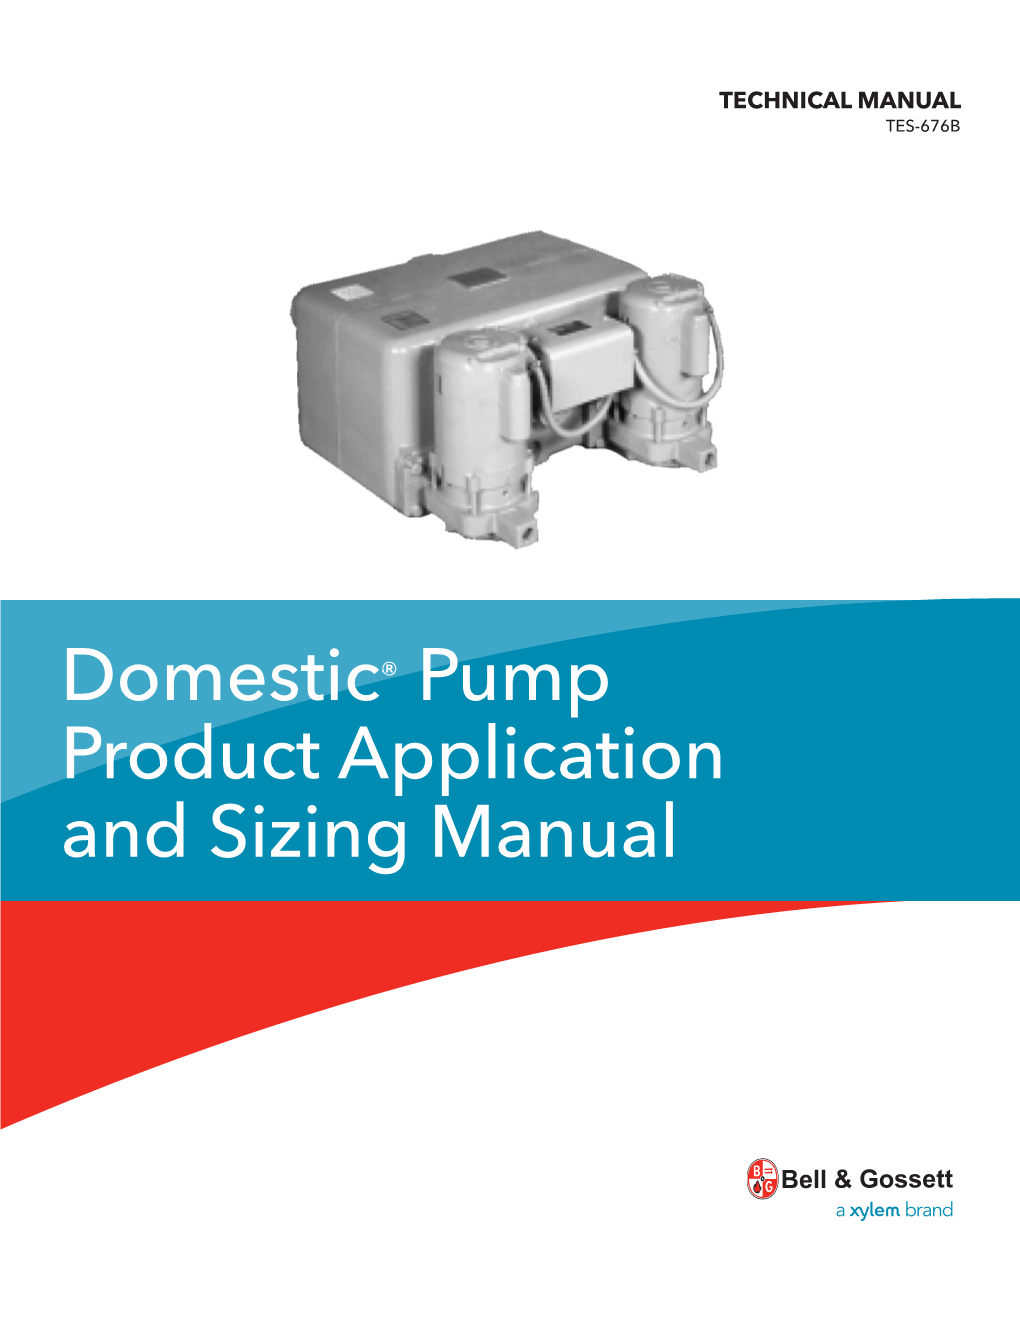 Domestic® Pump Product Application and Sizing Manual TABLE of CONTENTS